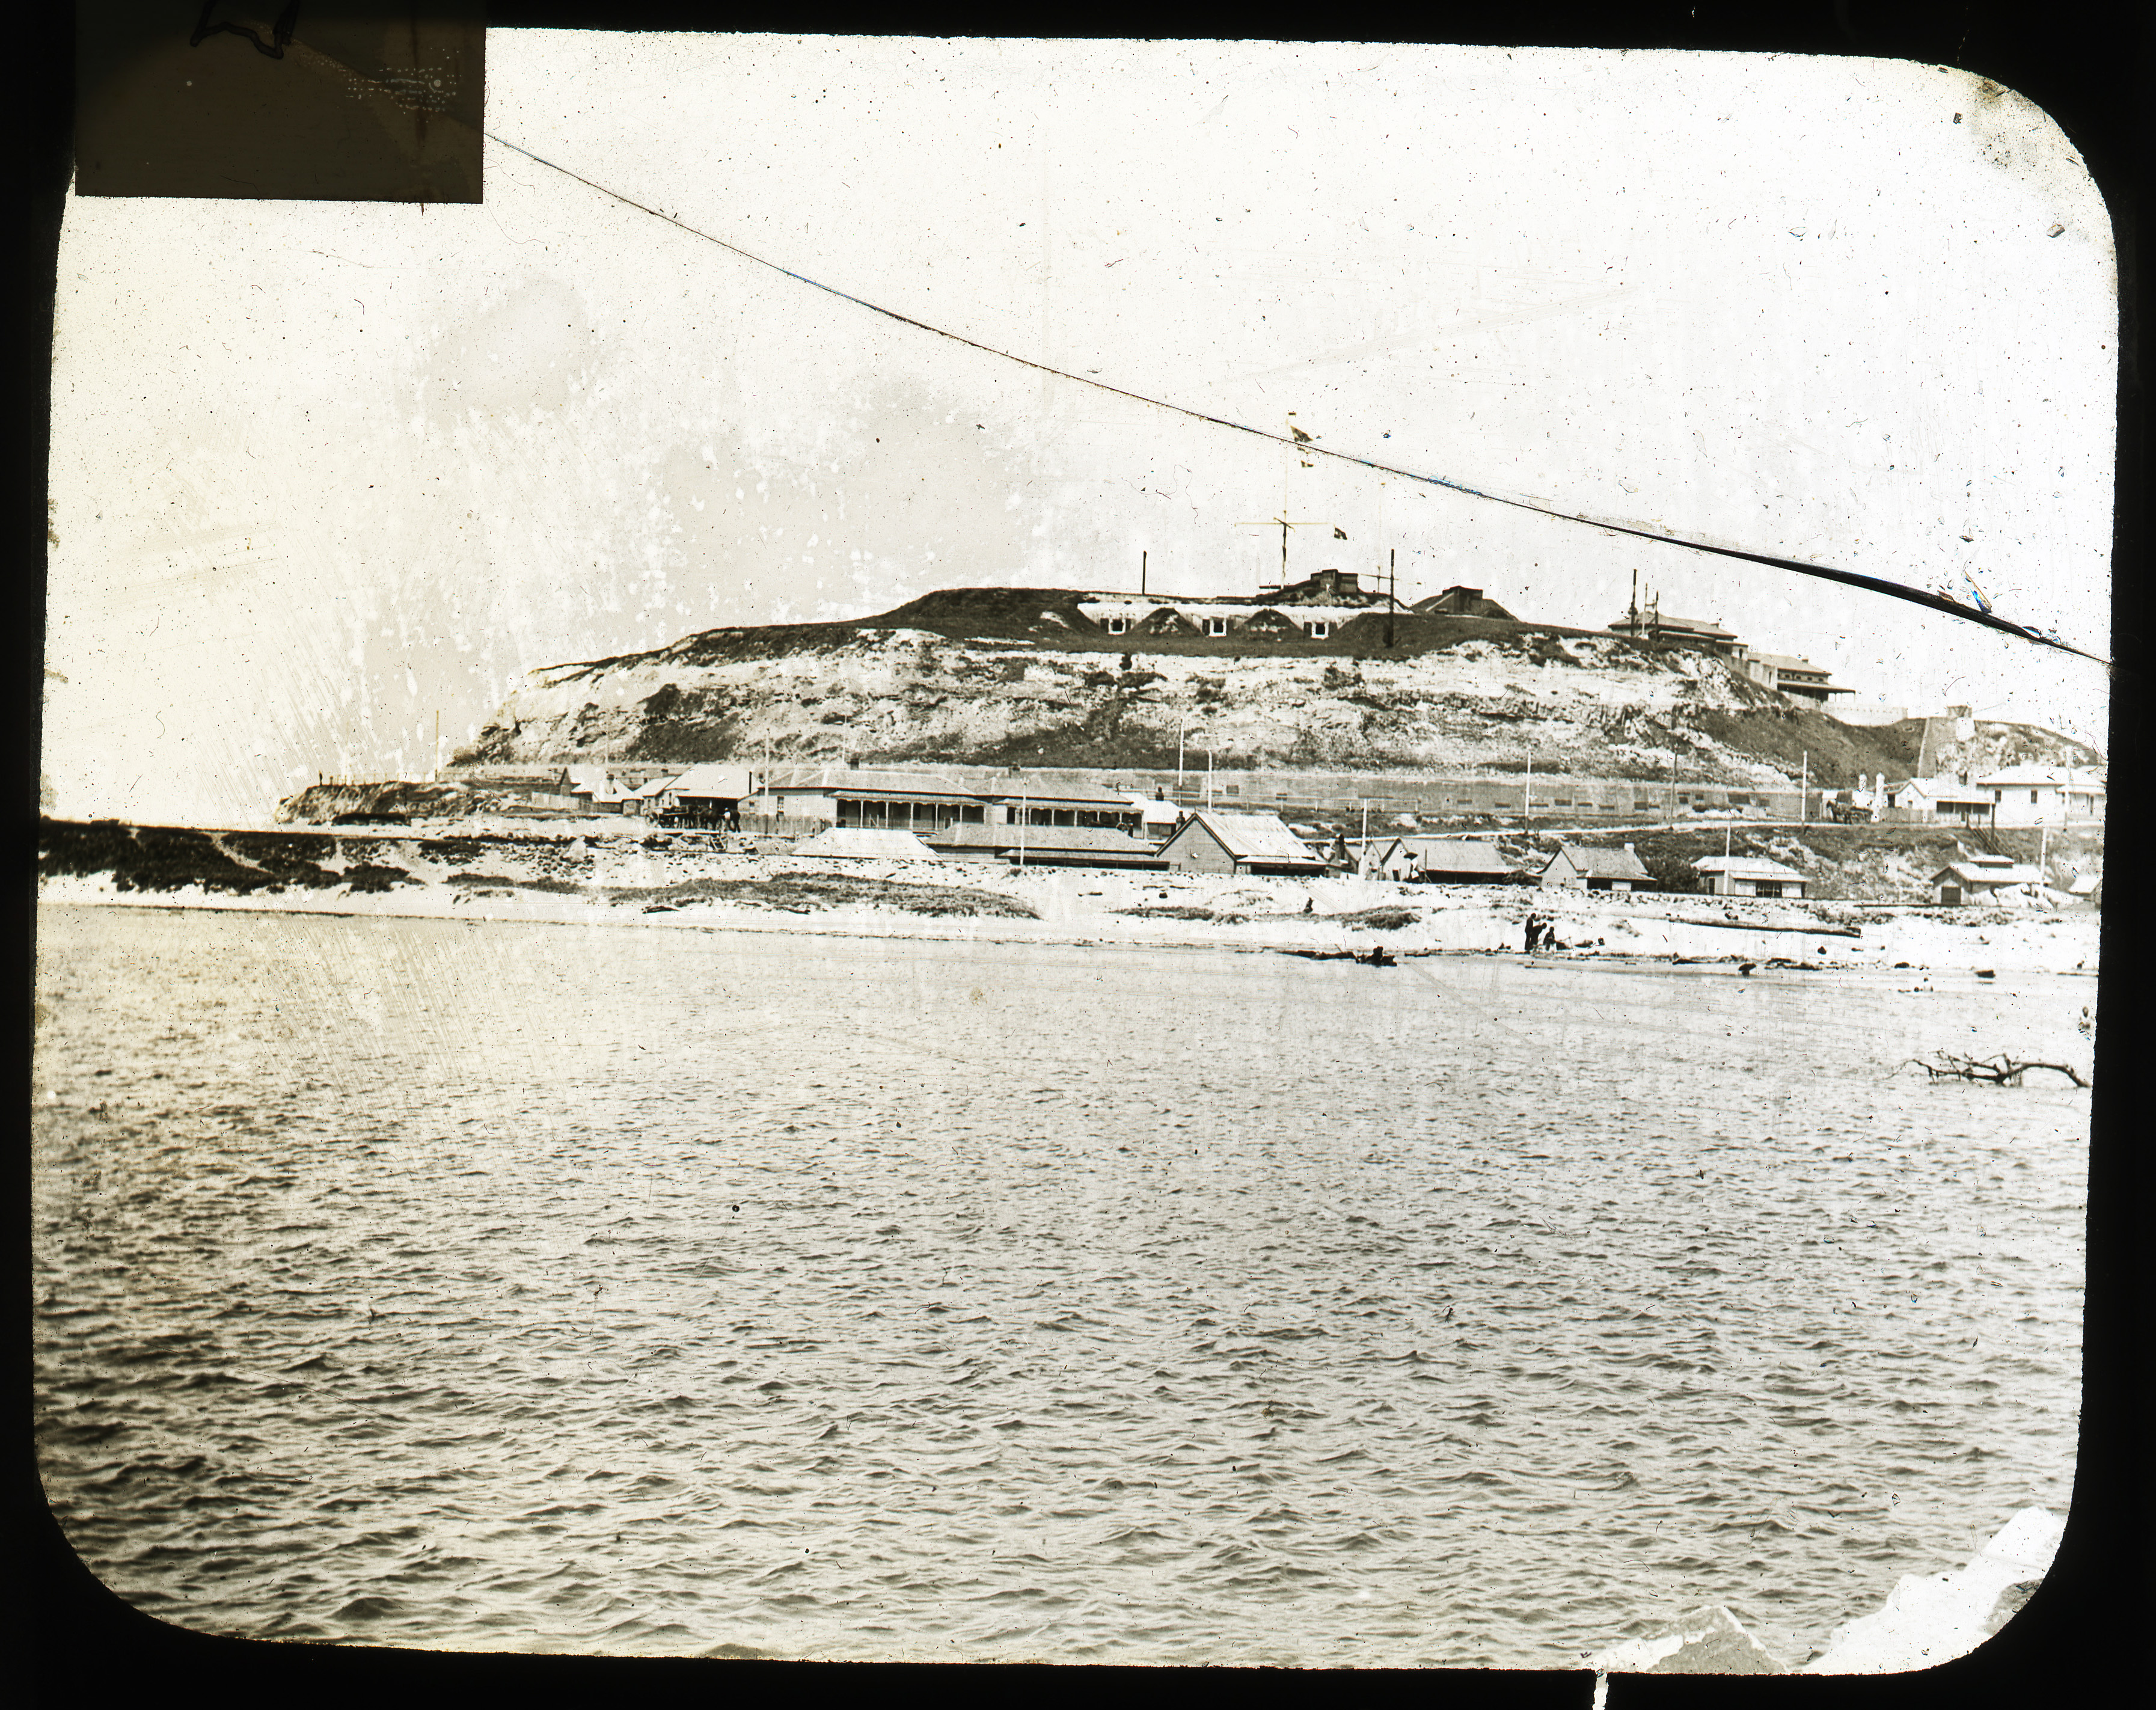 Fort Scratchley, Newcastle, NSW. From the Mr. E. Braggett Collection (University of Newcastle)